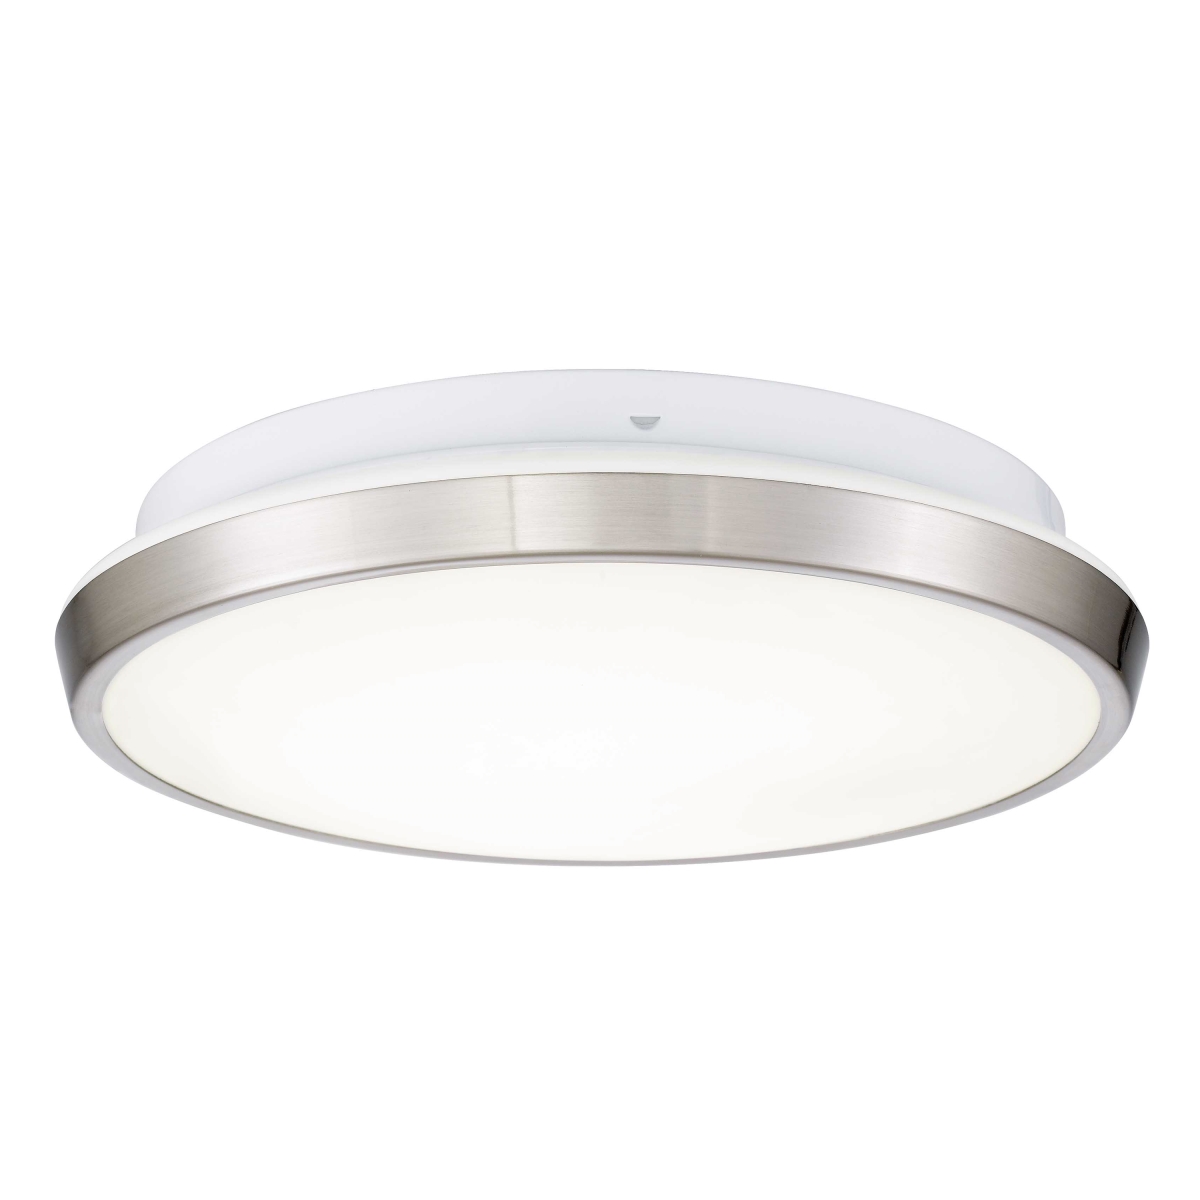 Picture of Worldwide Lighting E30001-005 3.375 x 14 x 14 in. Eclipse Color Changing LED Integrated Circle Flush Mount Ceiling Light